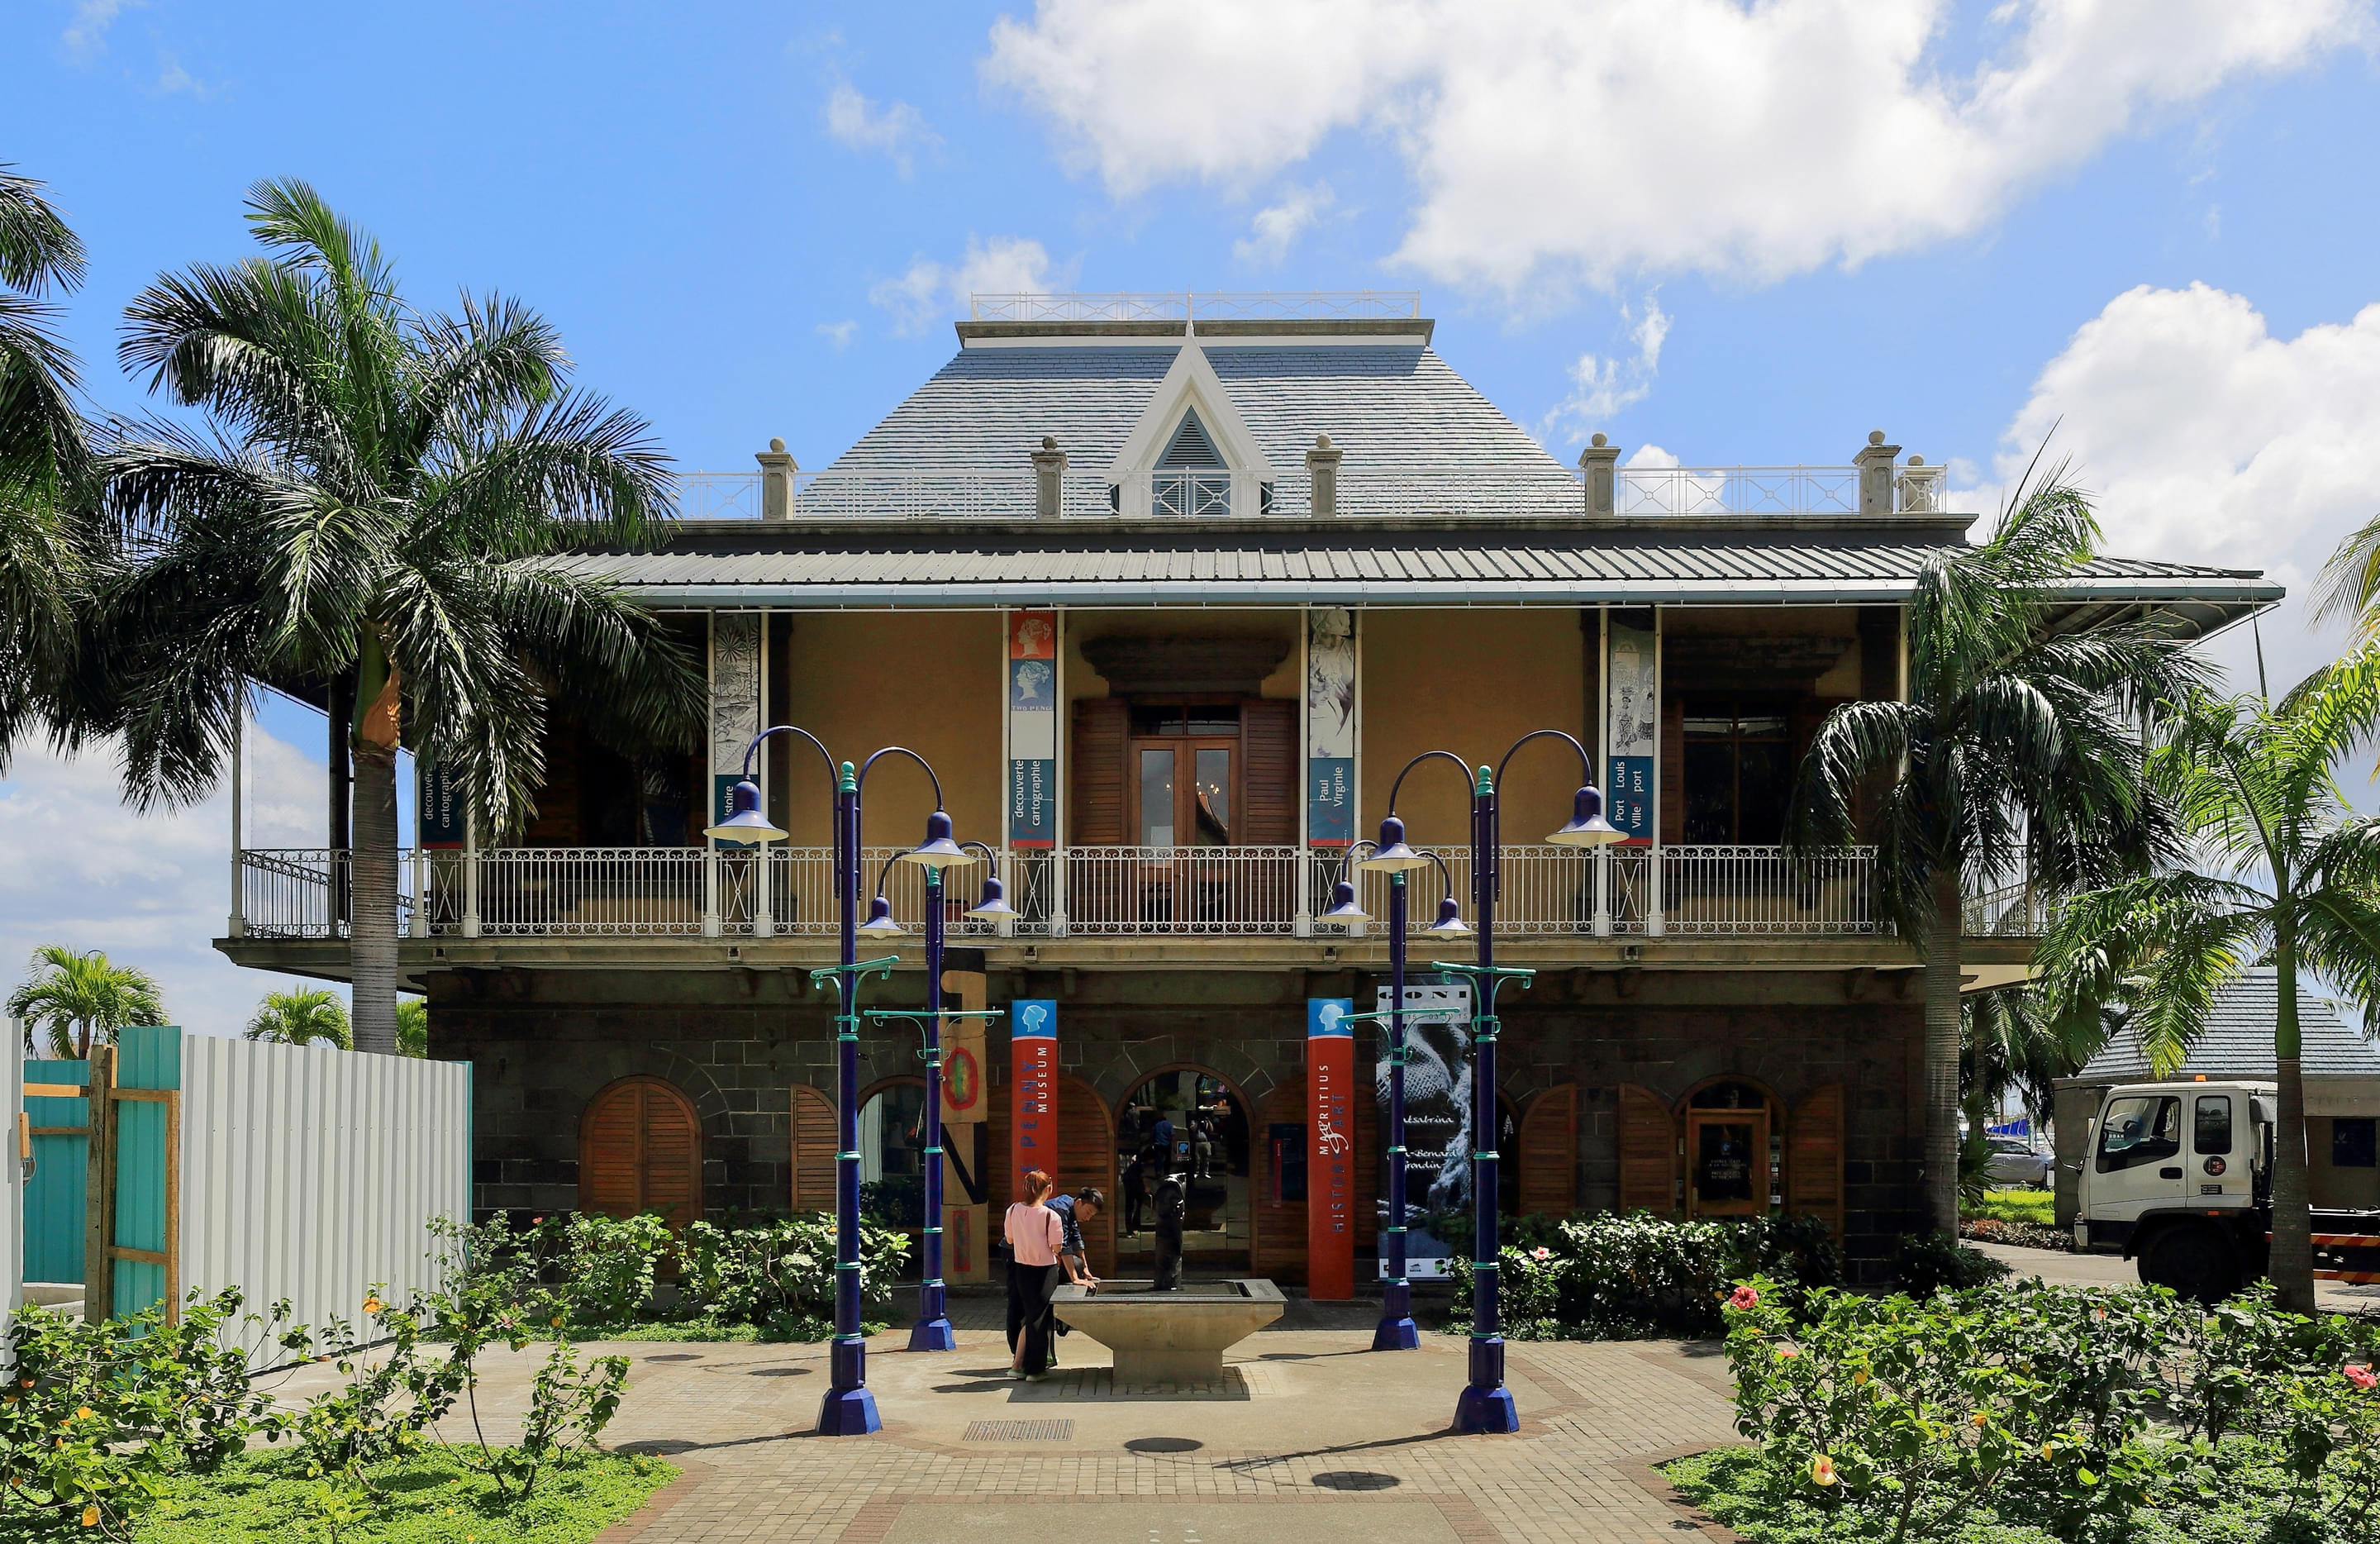 The Blue Penny Museum Overview